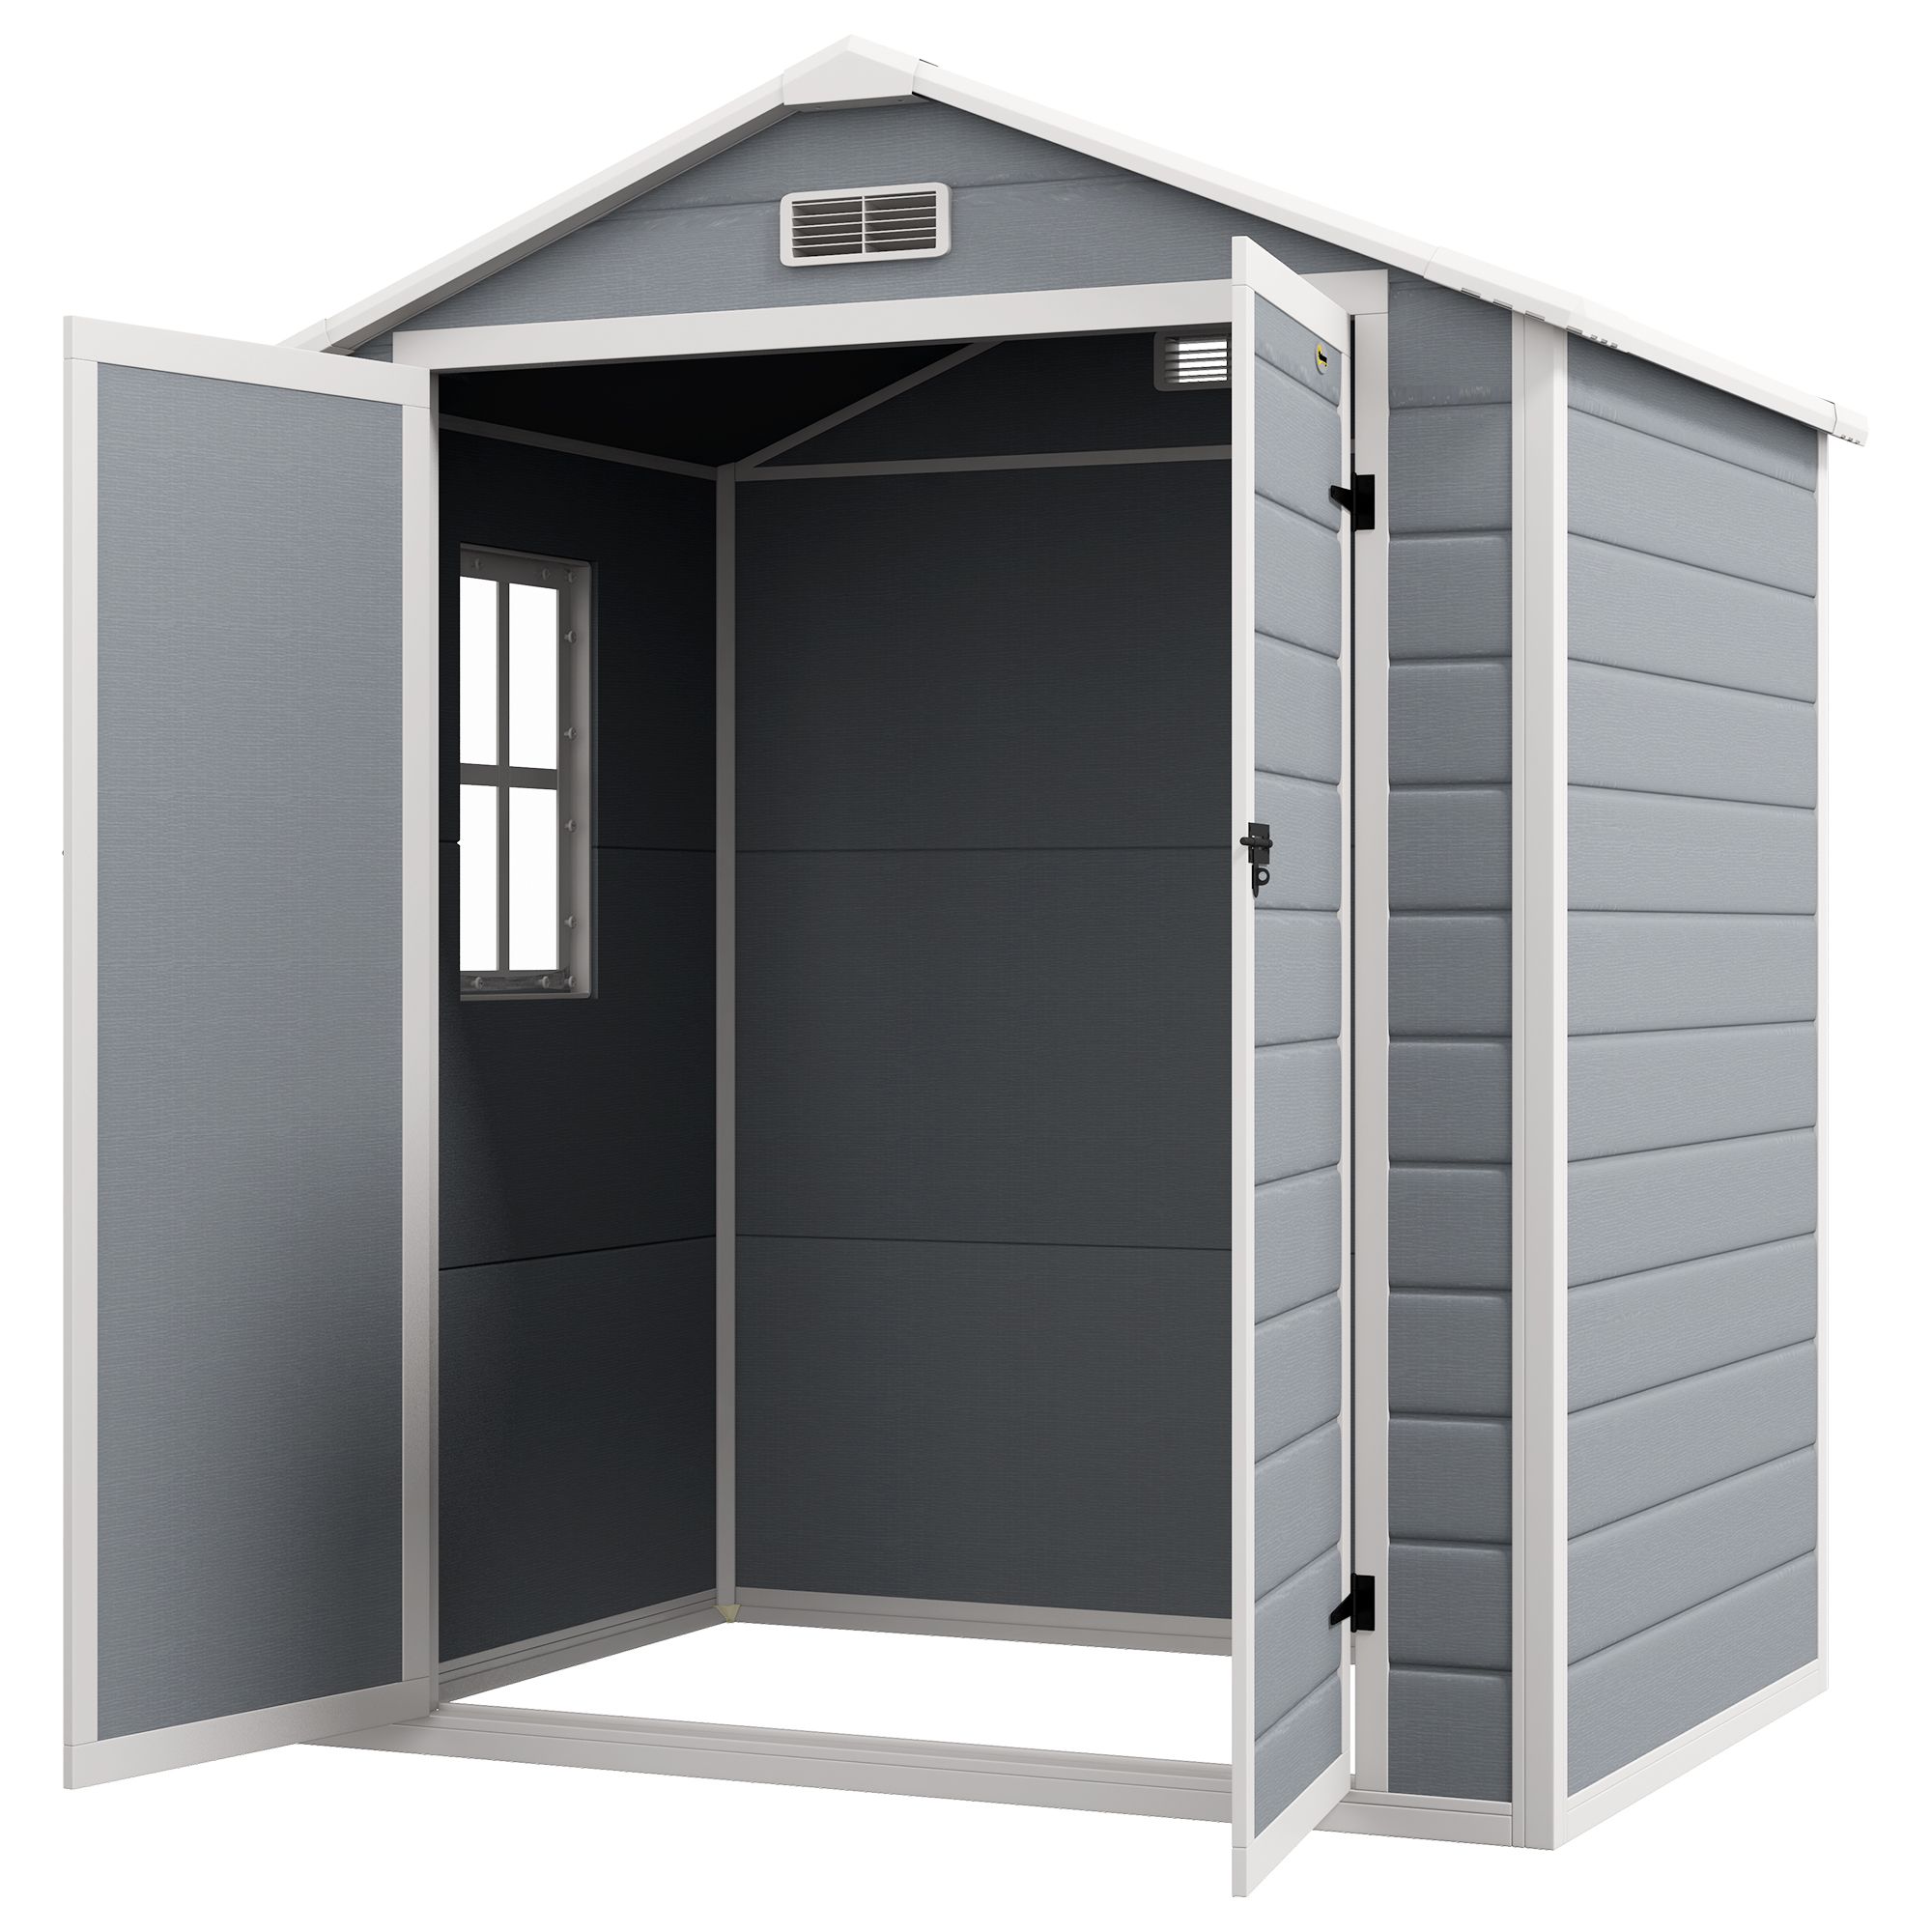 Outsunny 6'x4.5' Garden Storage Shed, Lockable Garden Shed With Double Doors, Window, Vent And Plastic Roof, Grey